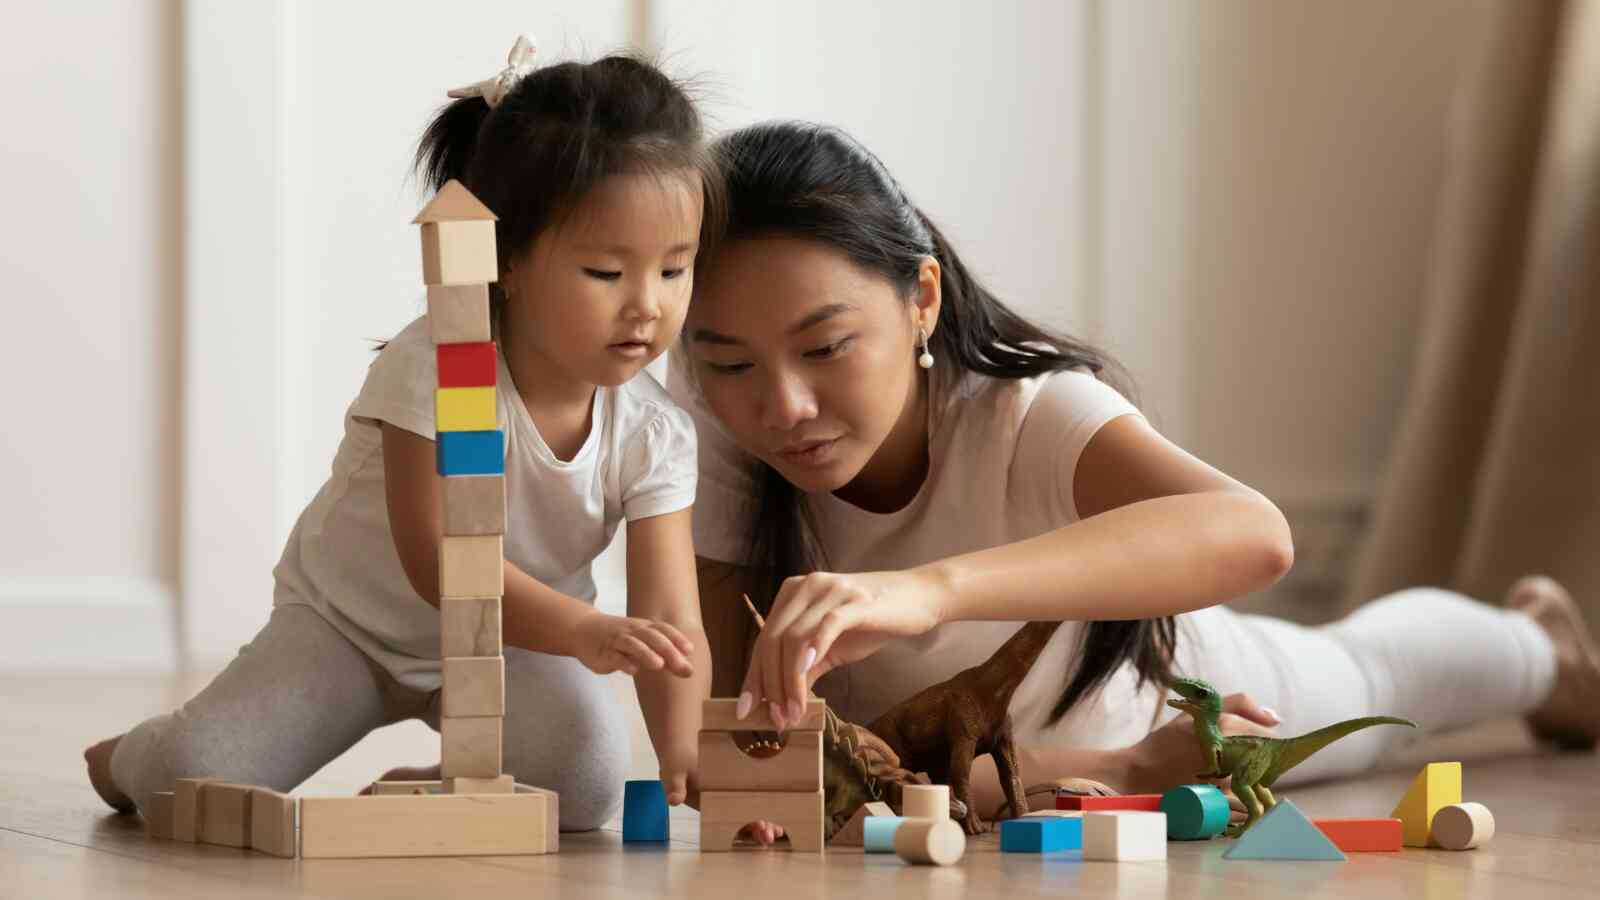 A young child and an adult female are sitting next to each other stacking blocks. Both individuals have light brown skin